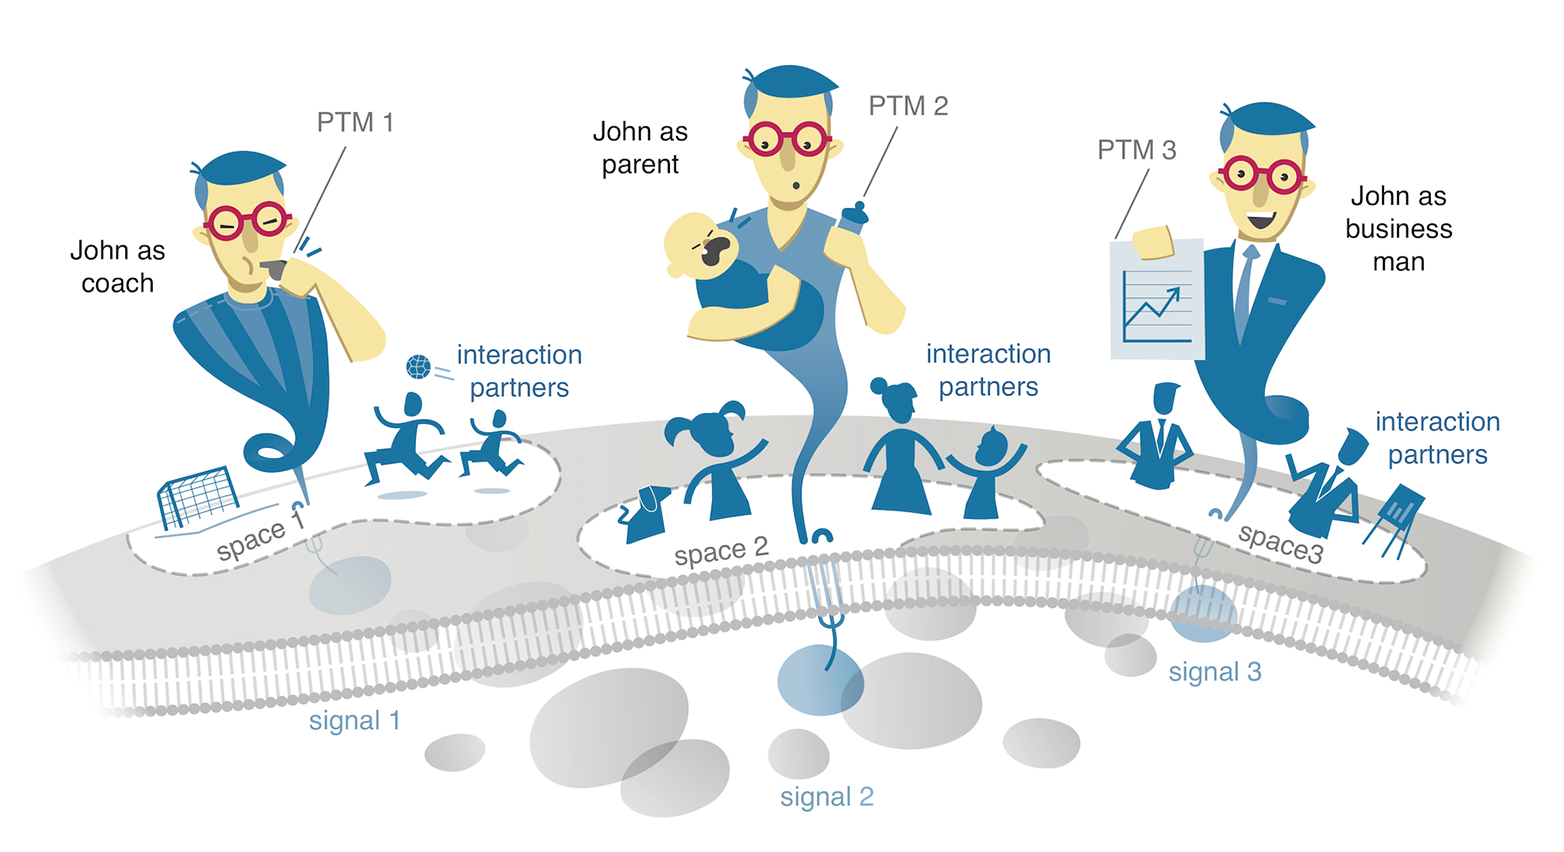 Enlarged view: The same surface protein (John) is subsequently equipped with various &quot;tools&quot; (PTM 1 to 3 = posttranslational modifications) so that John can play a different role in the respective functional island (space 1 to 3) (coach, parent, businessman). (Graphic: Tobias Fluck Graphic &amp; Motion Design )